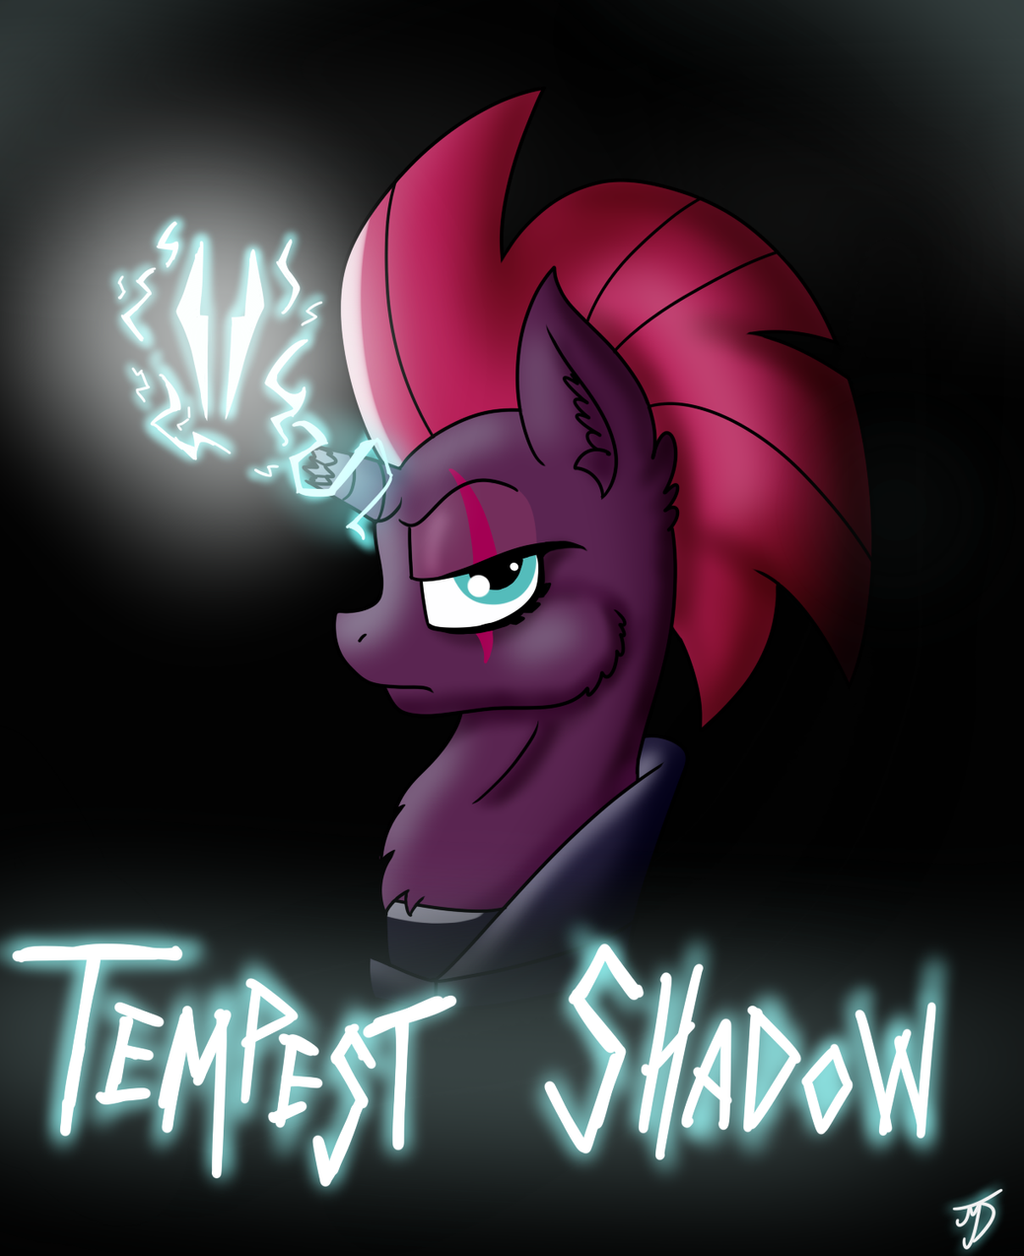 tempest_shadow_by_takutanuvataio-dbefqe1.png